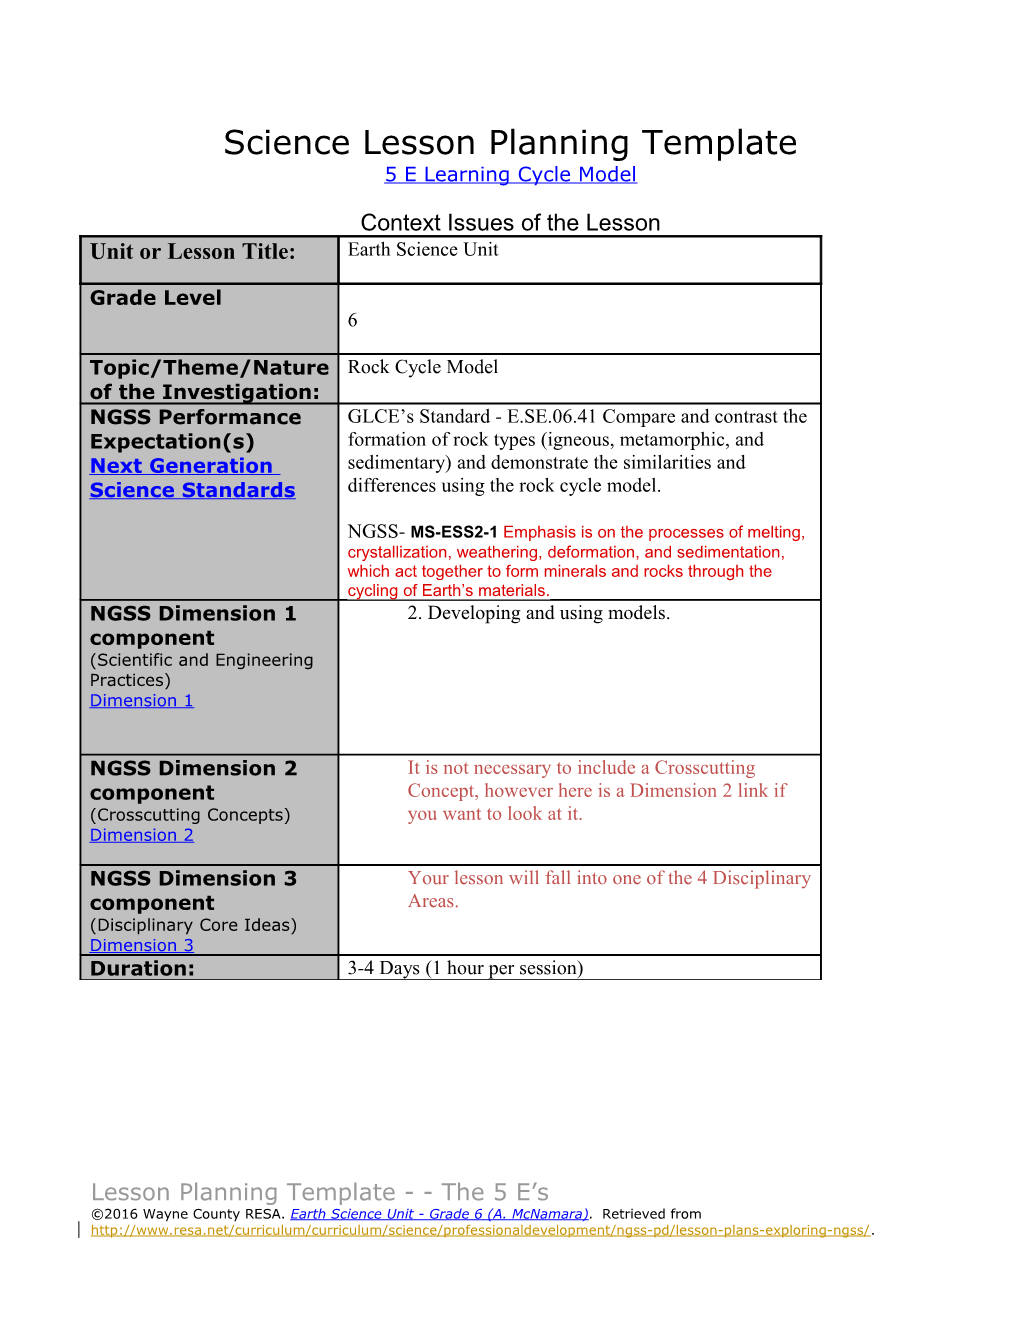 Science Lesson Planning Template s2